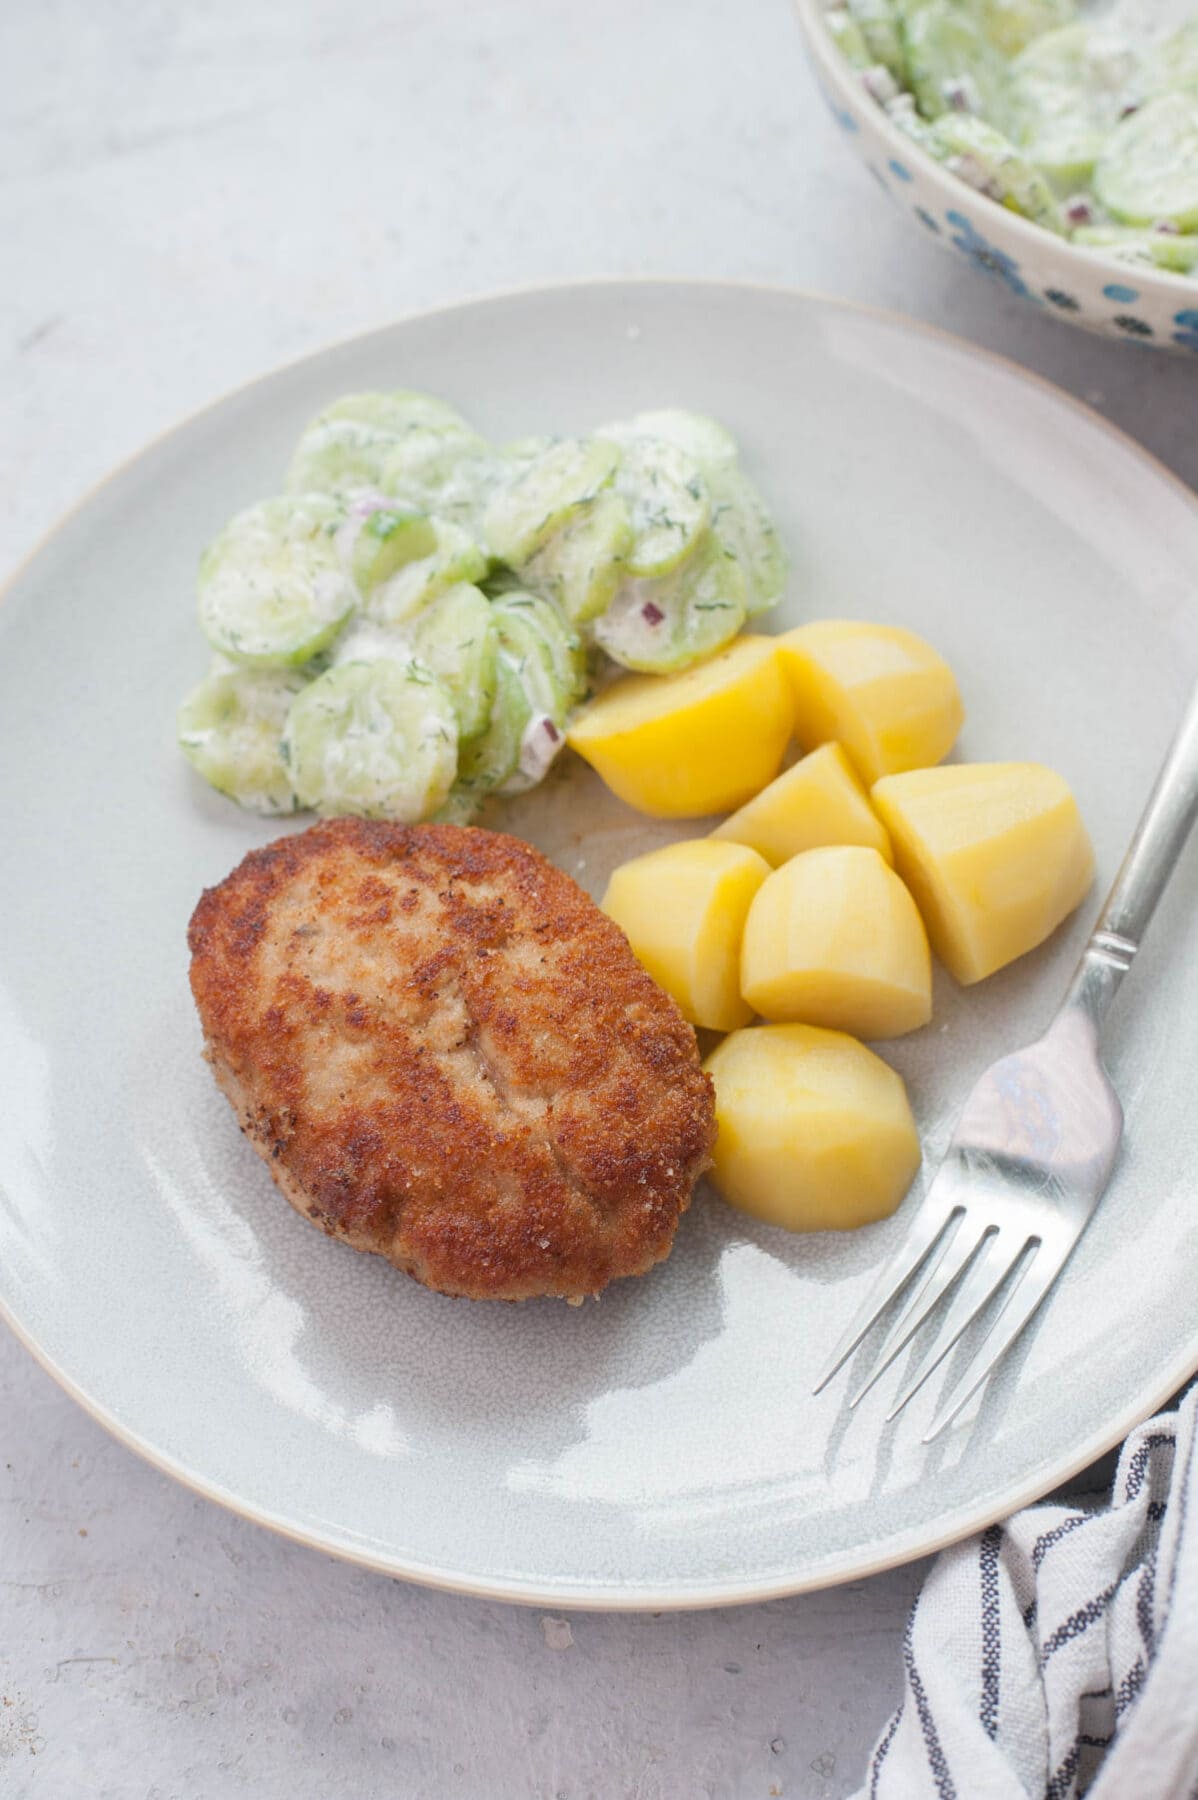 Kotlety mielone (Polish meat patties) on a blue plate with potatoes and cucumber salad.